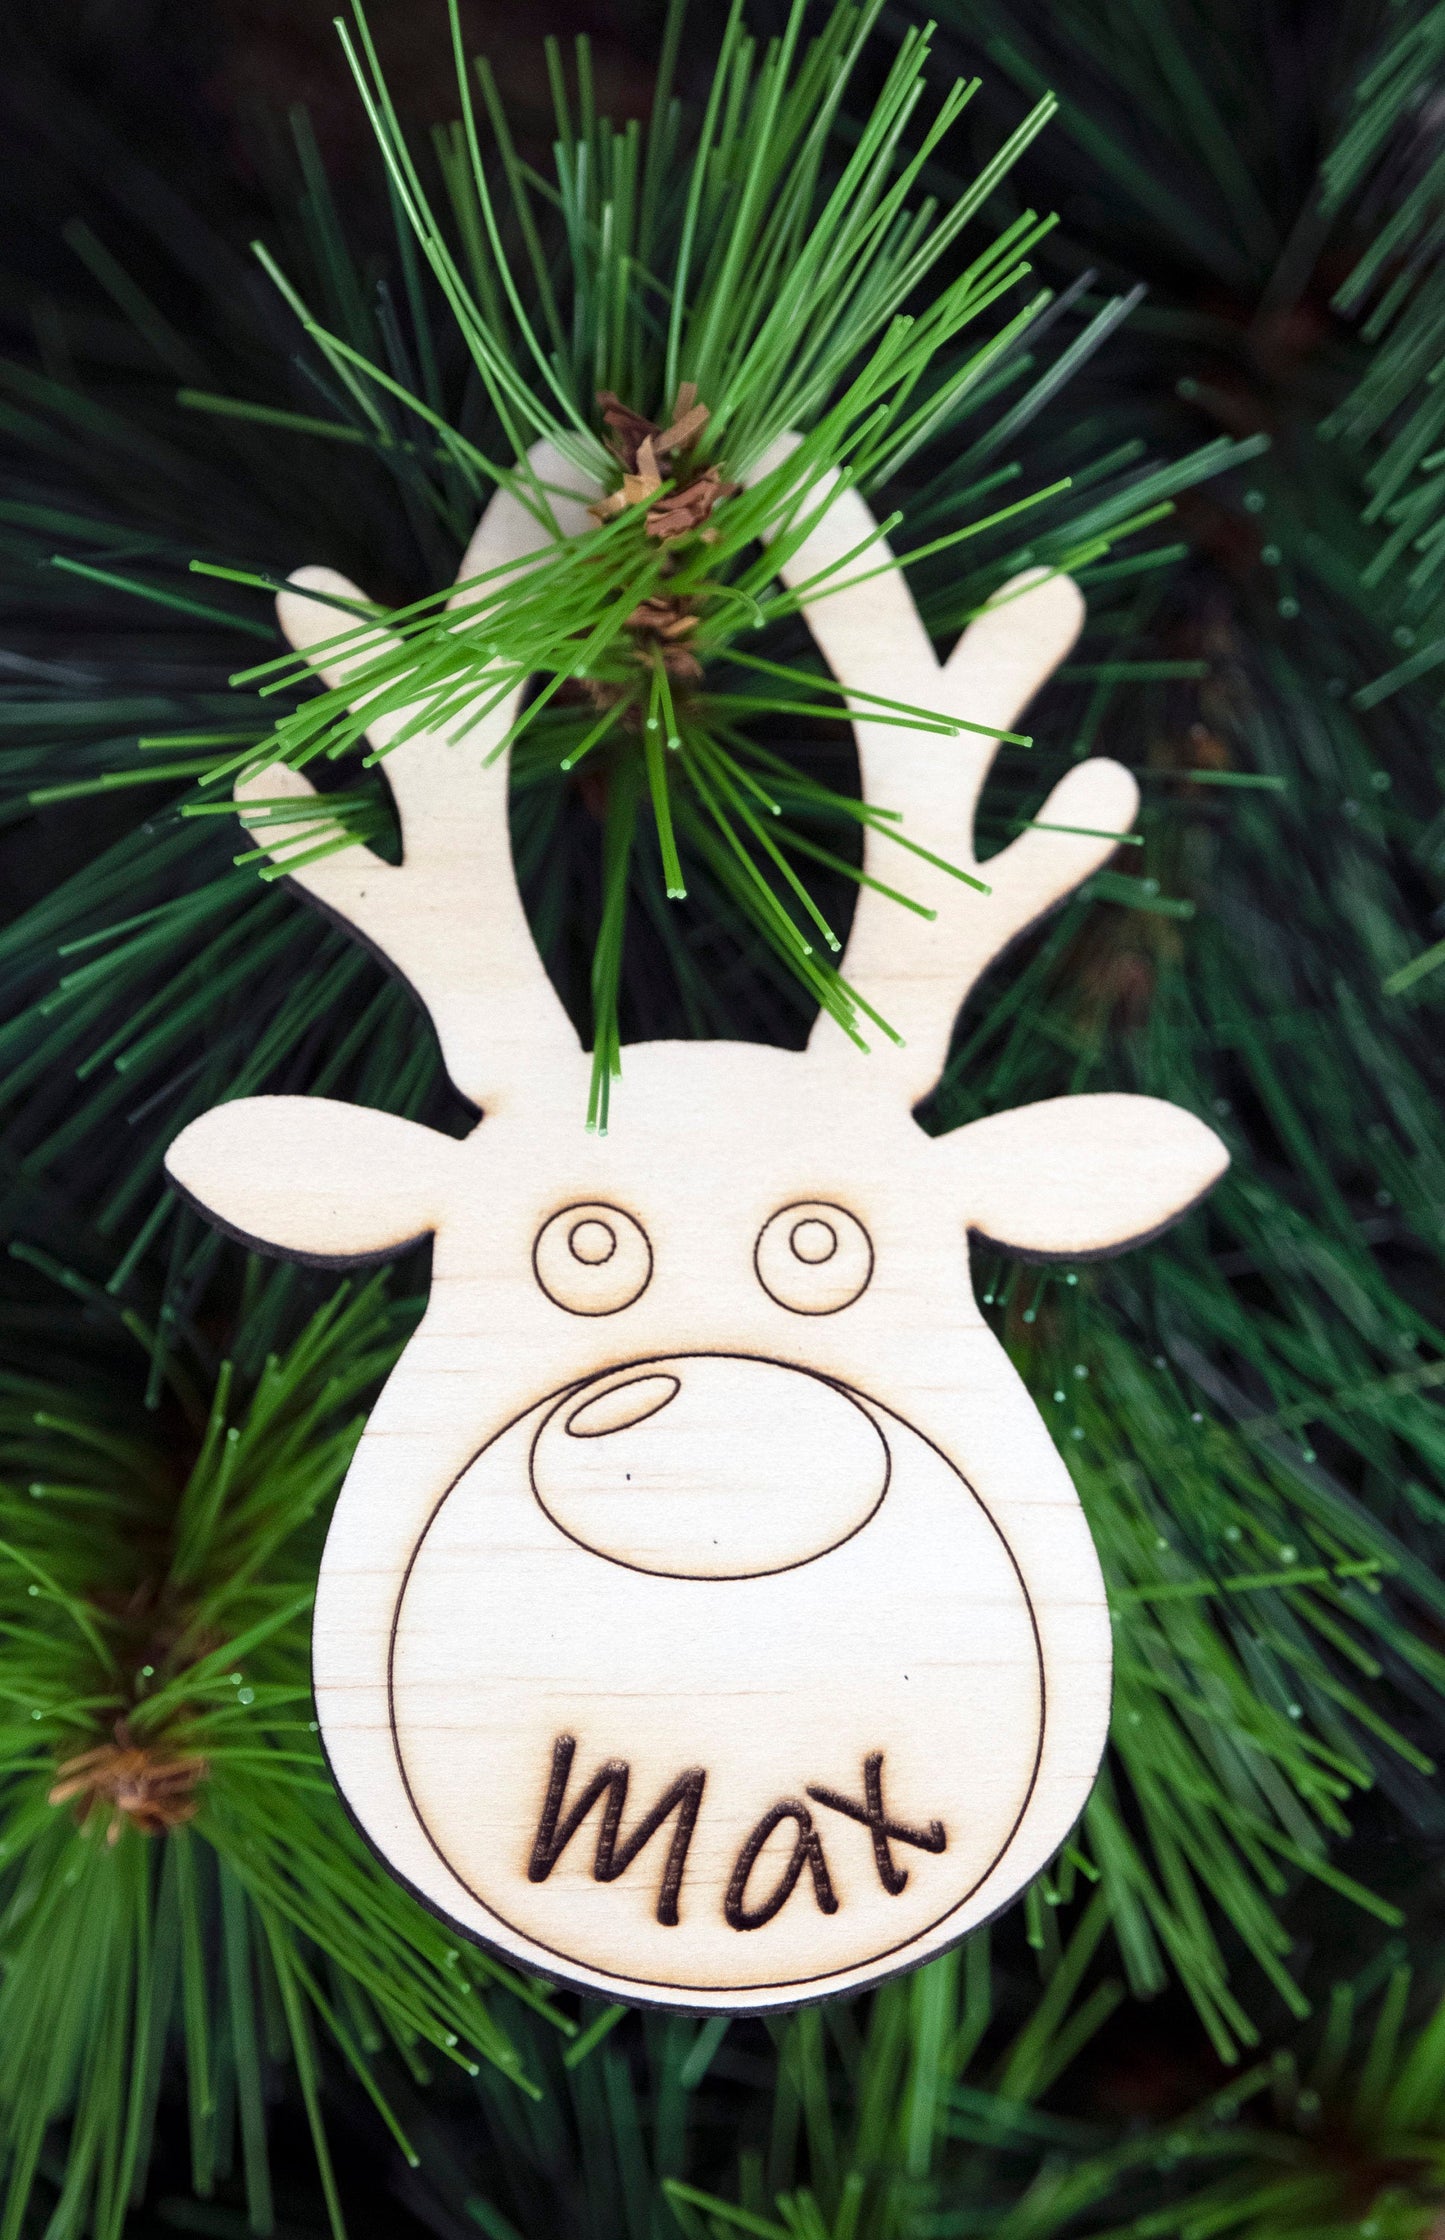 Christmas Place Settings ◽ Reindeer Table Decorations ◽ Name Place Cards ◽ Personalised Timber Place Cards